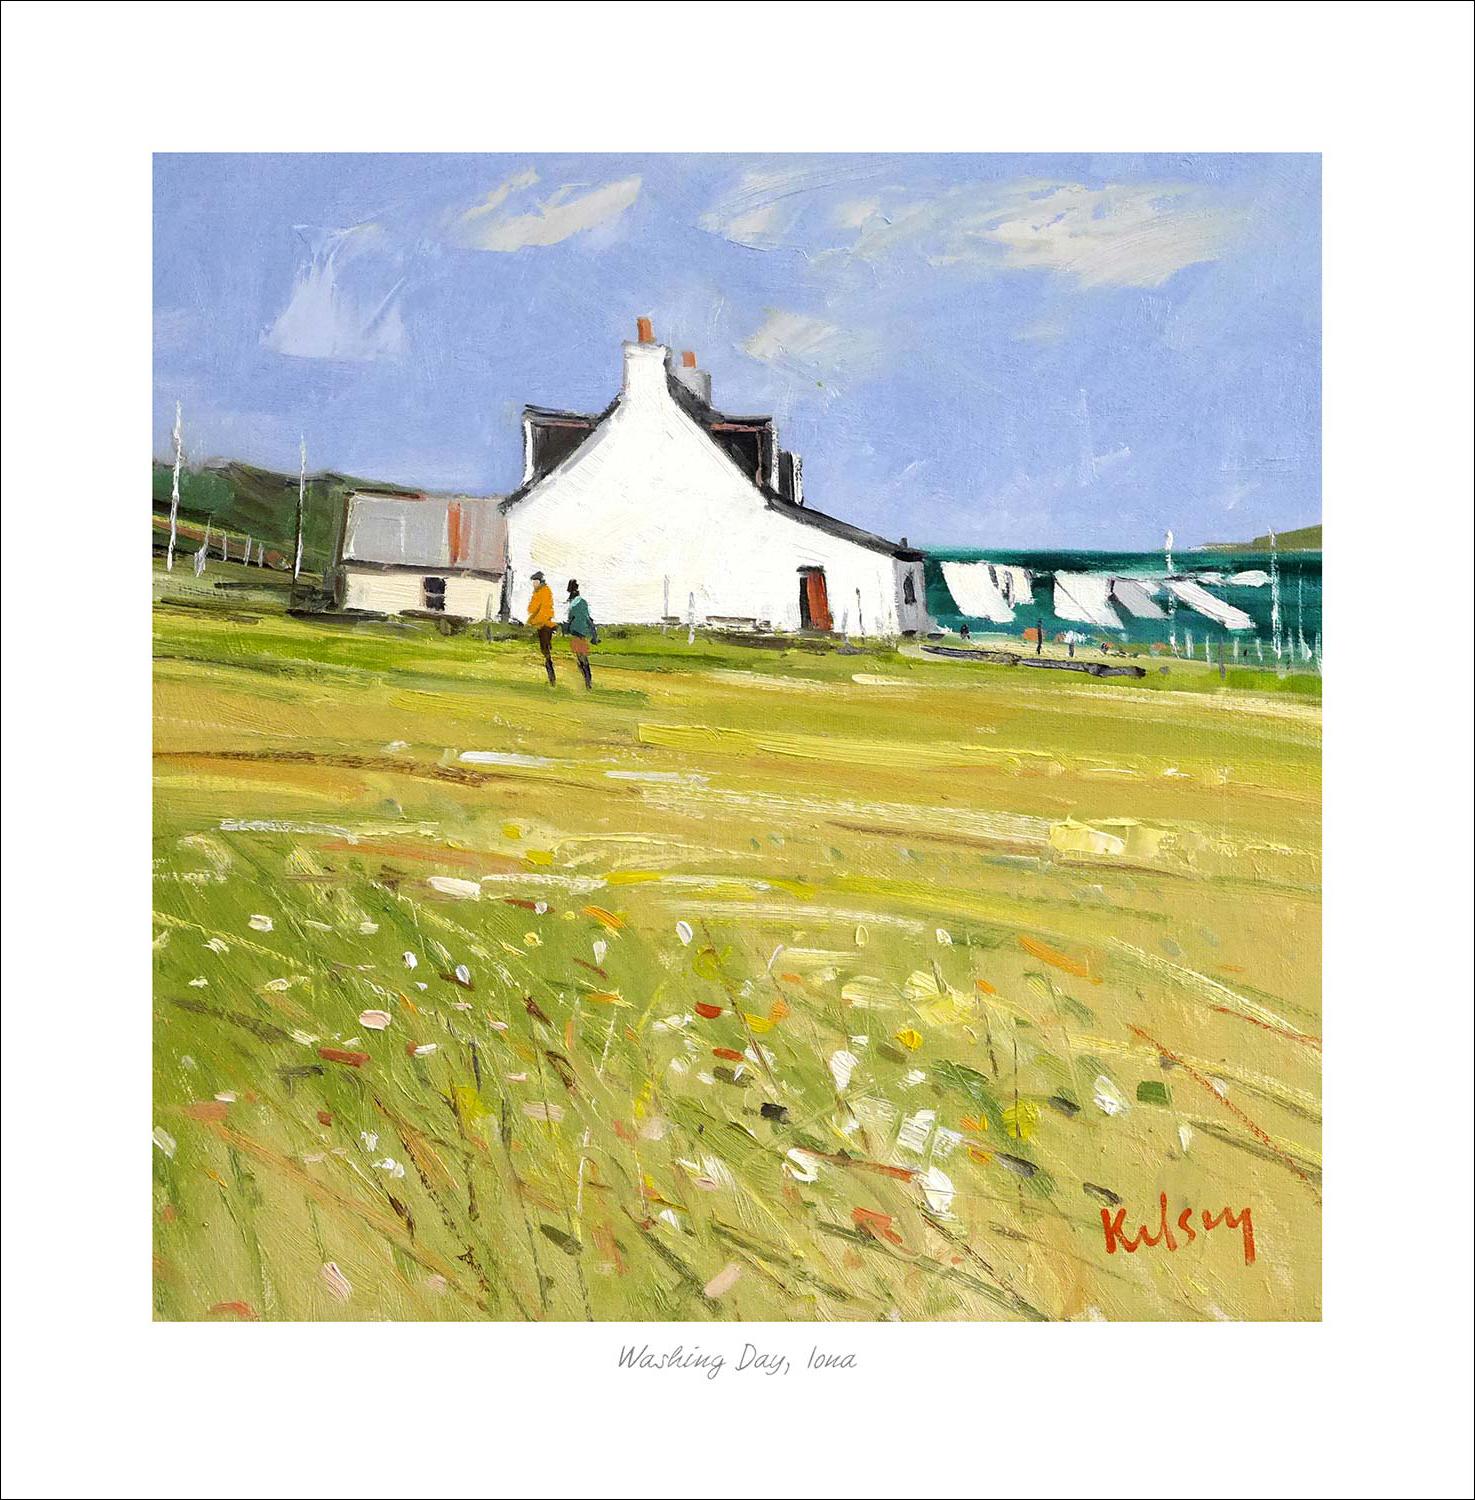 Washing Day, Iona Art Print from an original painting by artist Robert Kelsey